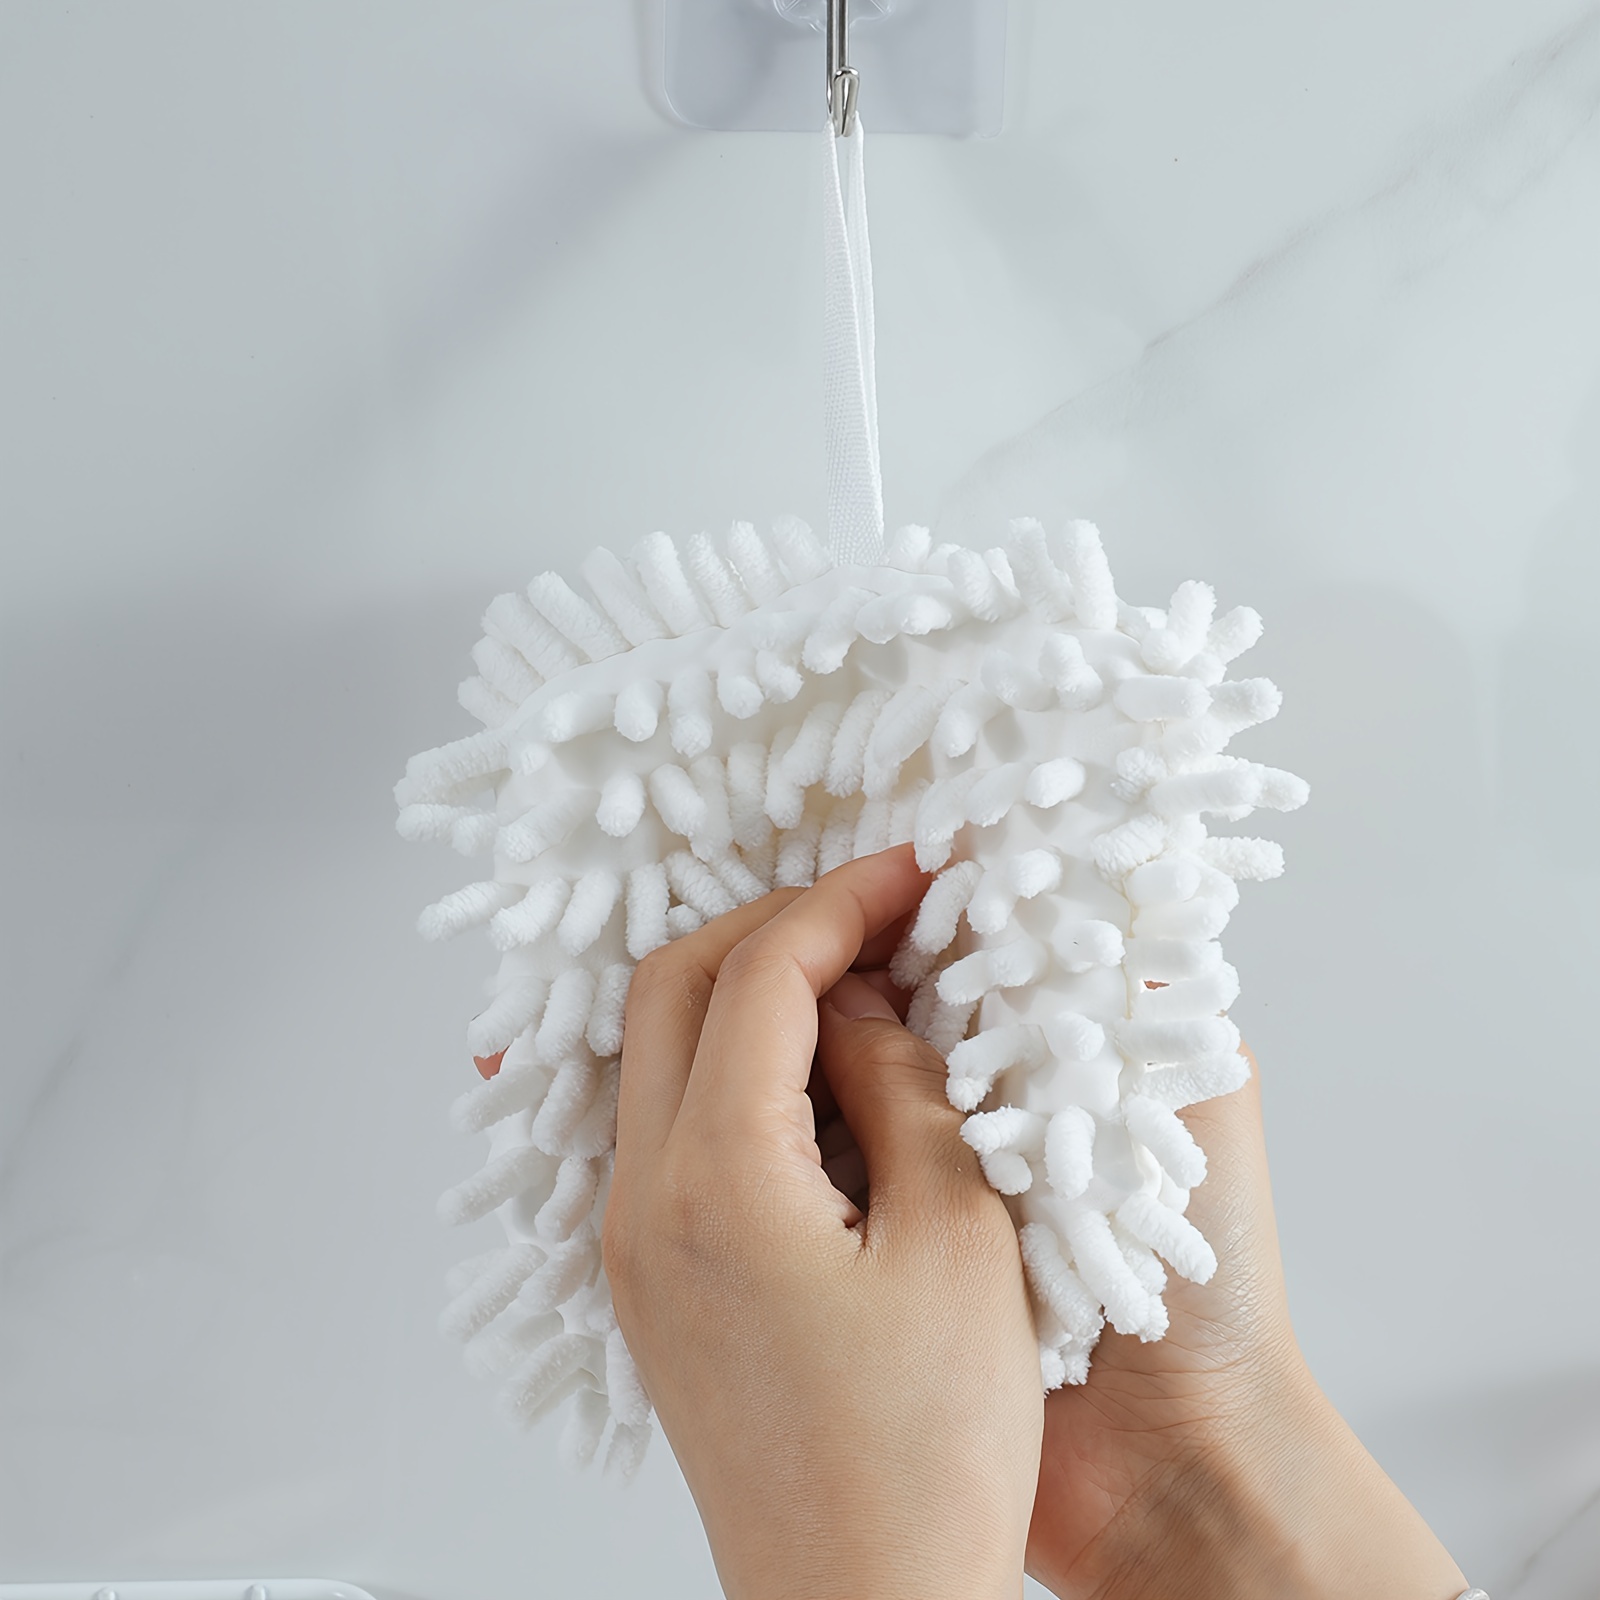 Fuzzy Ball Towel White/gray - Dry Your Hand Instantly Conveniently With  This Creative Bath Towel Decorative